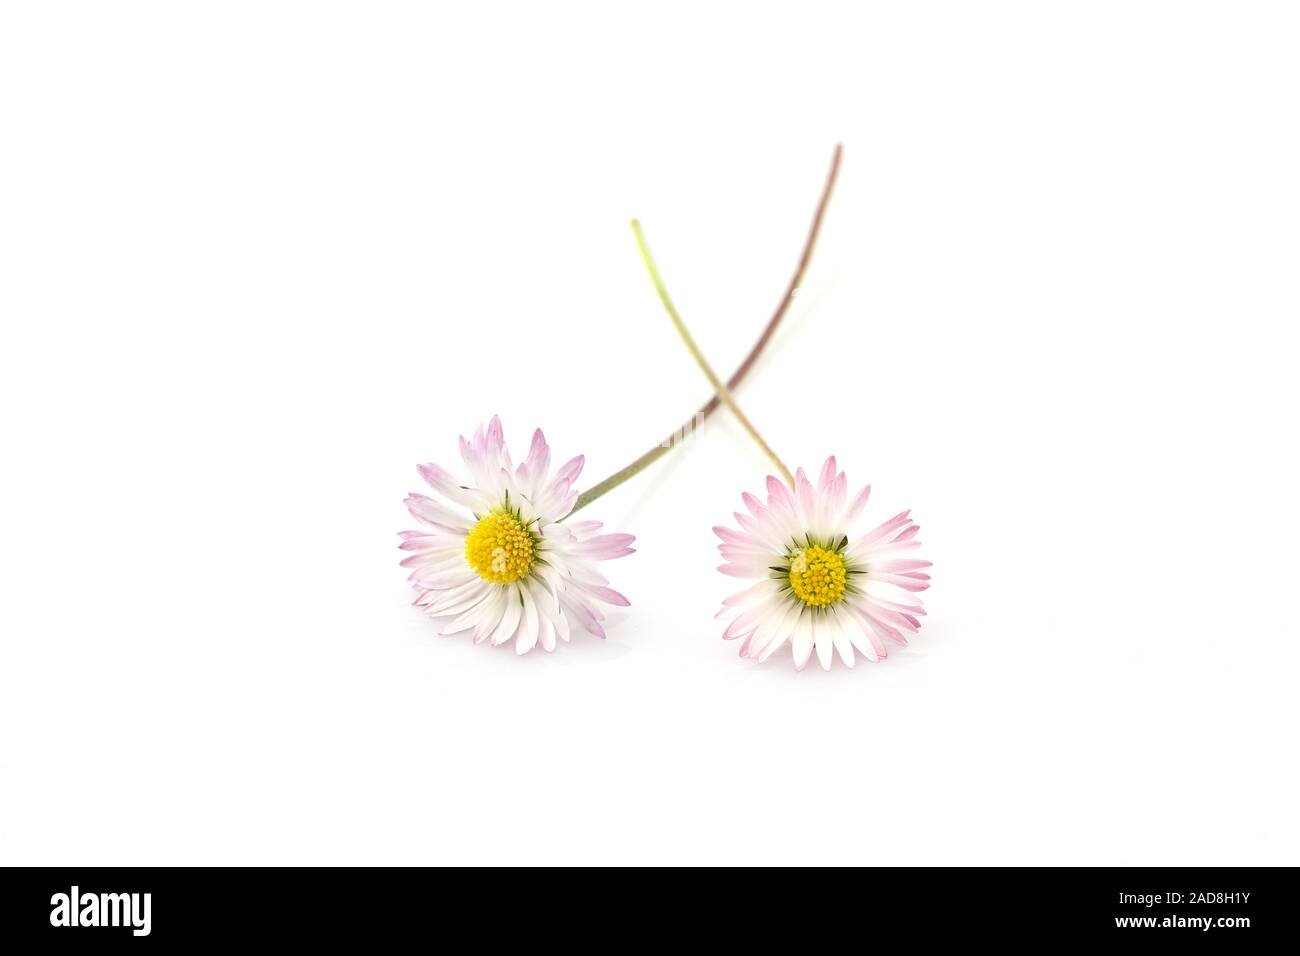 Two daisies (Bellis perennis), close-up view Stock Photo